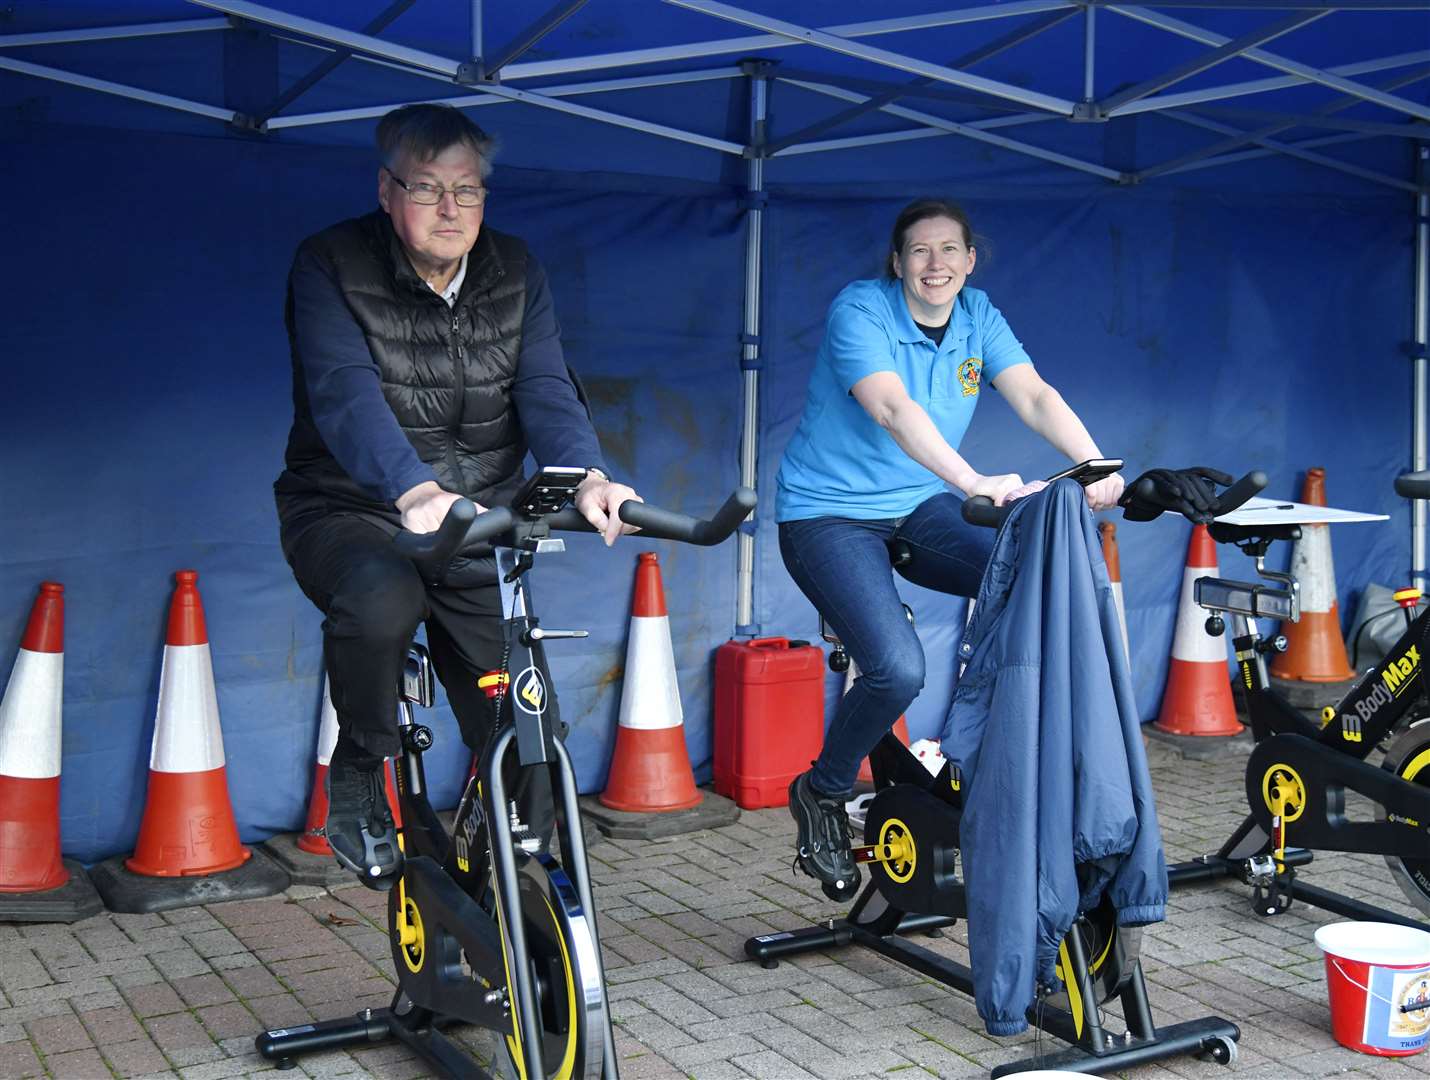 Captain Alan McIntosh and Laura Taylor help rake in the pounds at the cycle fundraiser. Picture: Beth Taylor